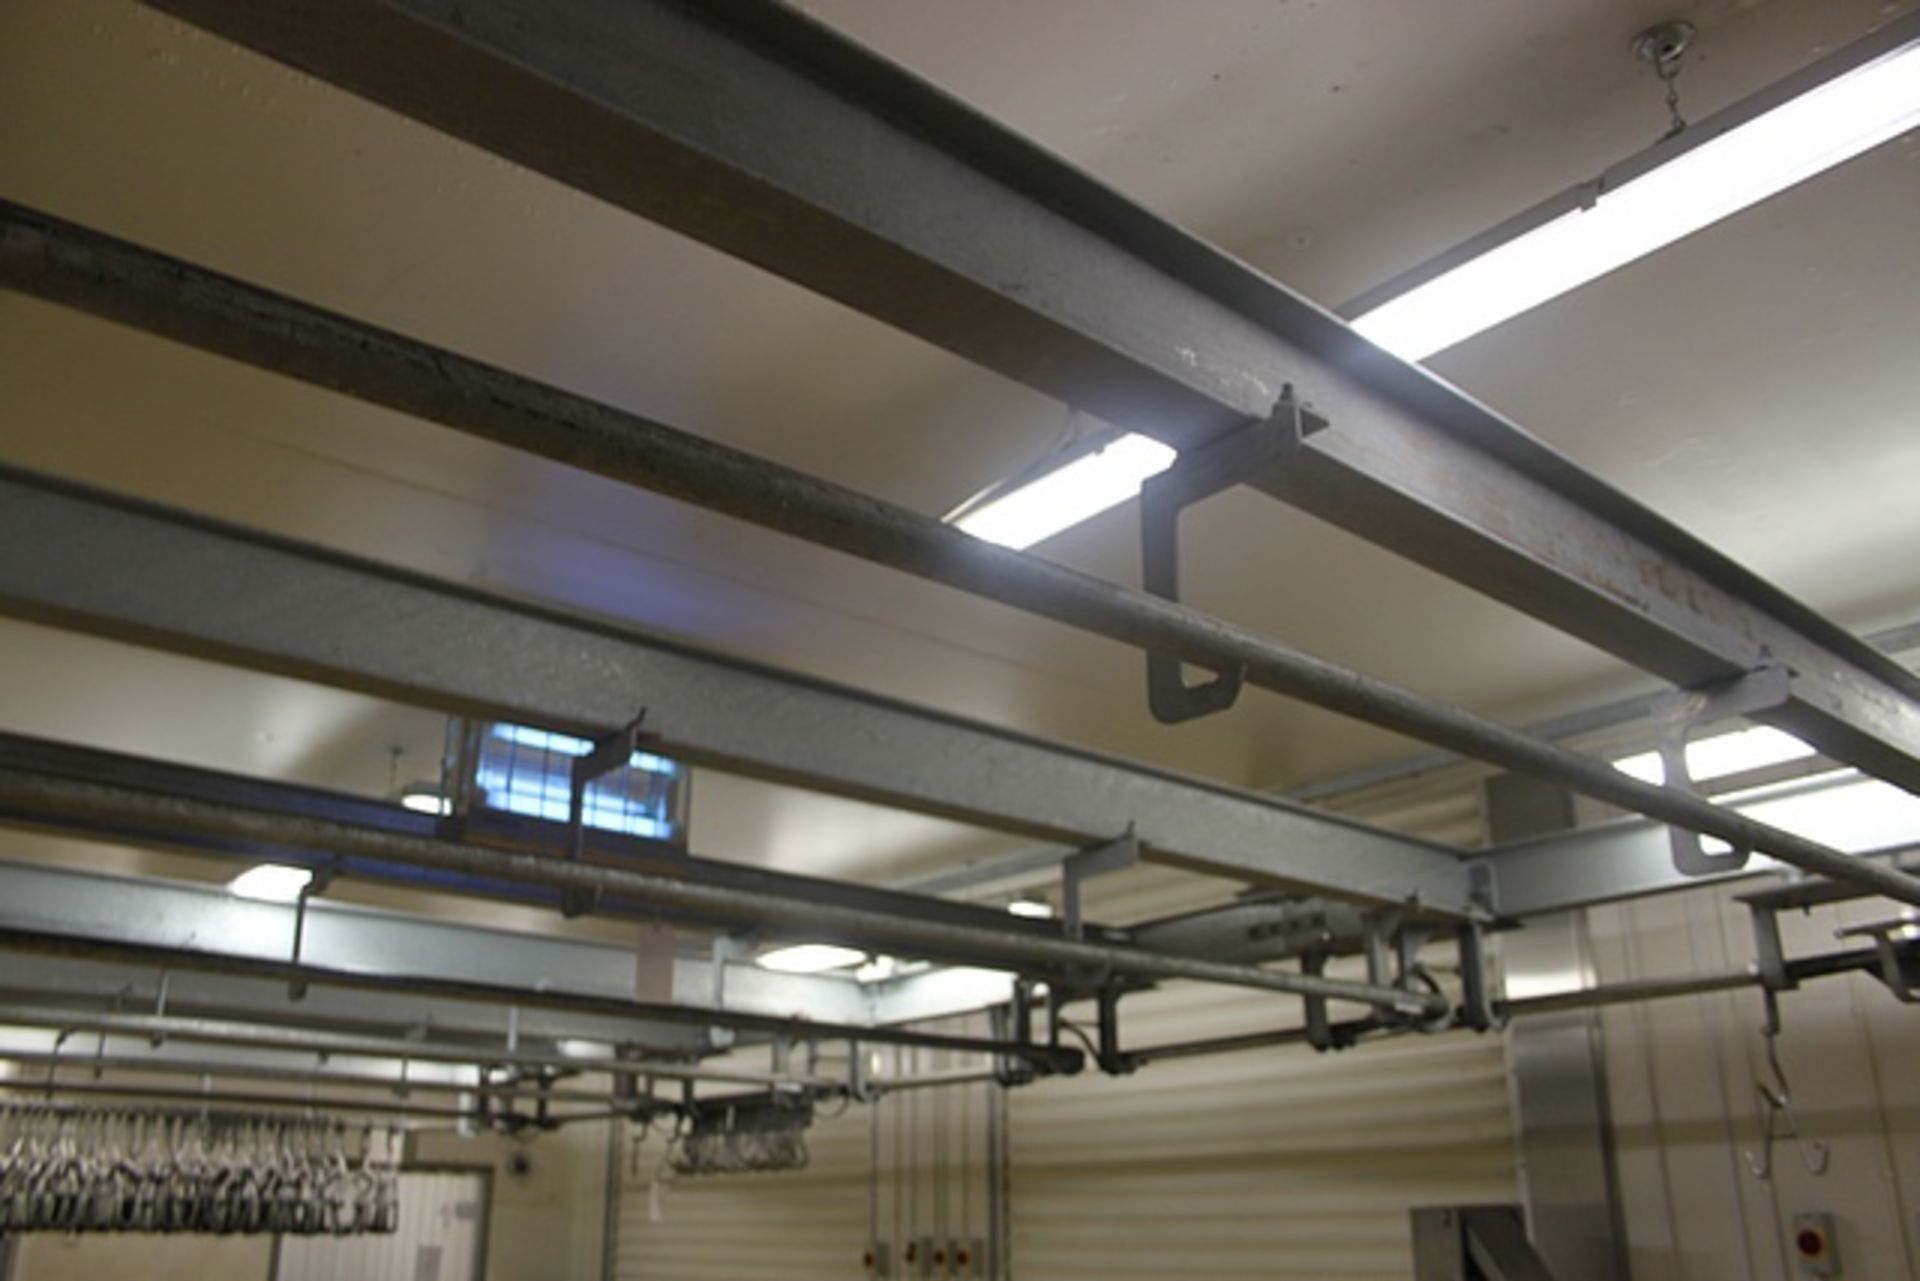 Chill Rails Meat & Slaughterhouse galvanised round bar hanging rail system manual operated - Bild 2 aus 2